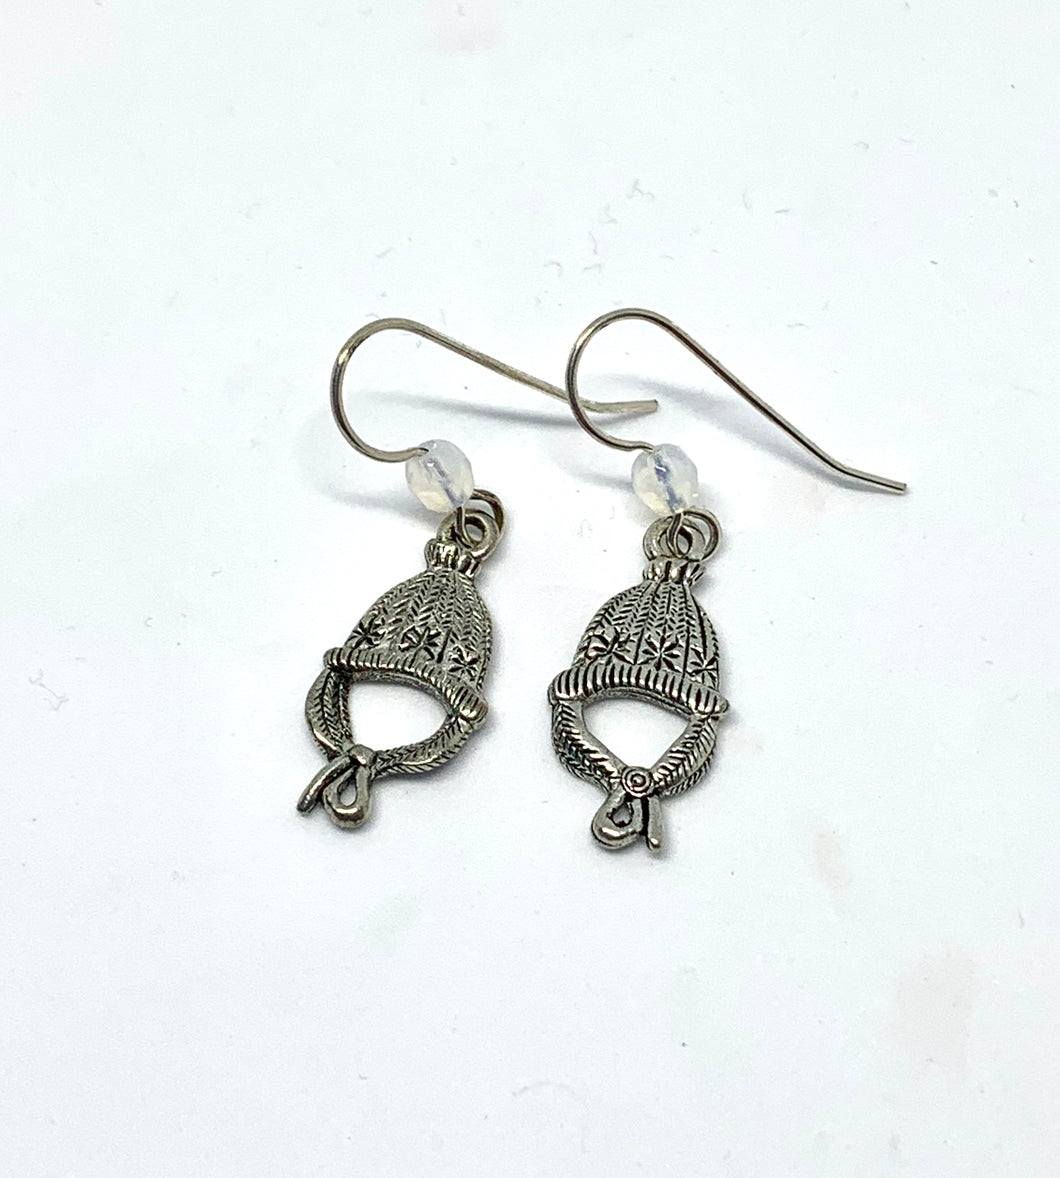 Winter Hat Earrings - Lively Accents